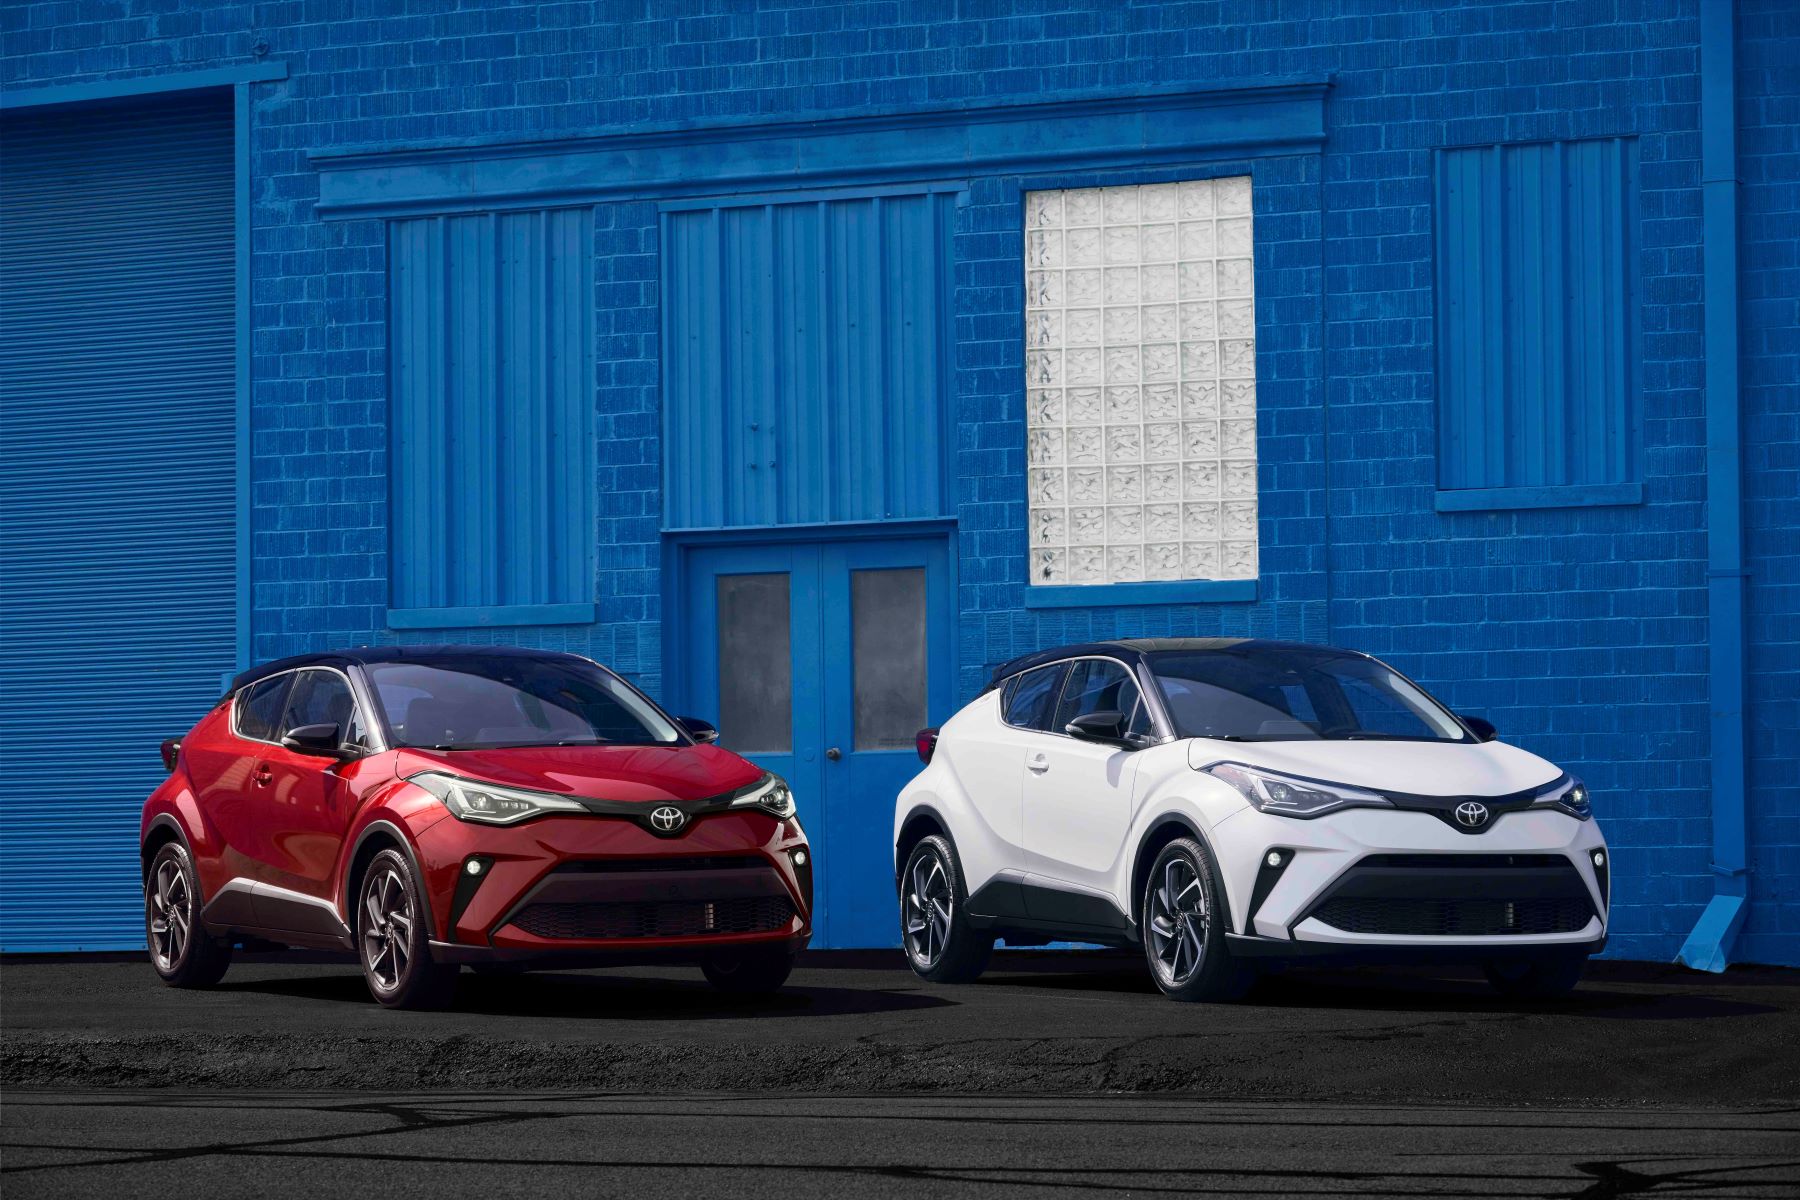 2022 Toyota C-HR models in red and white parked in front of a blue brick building